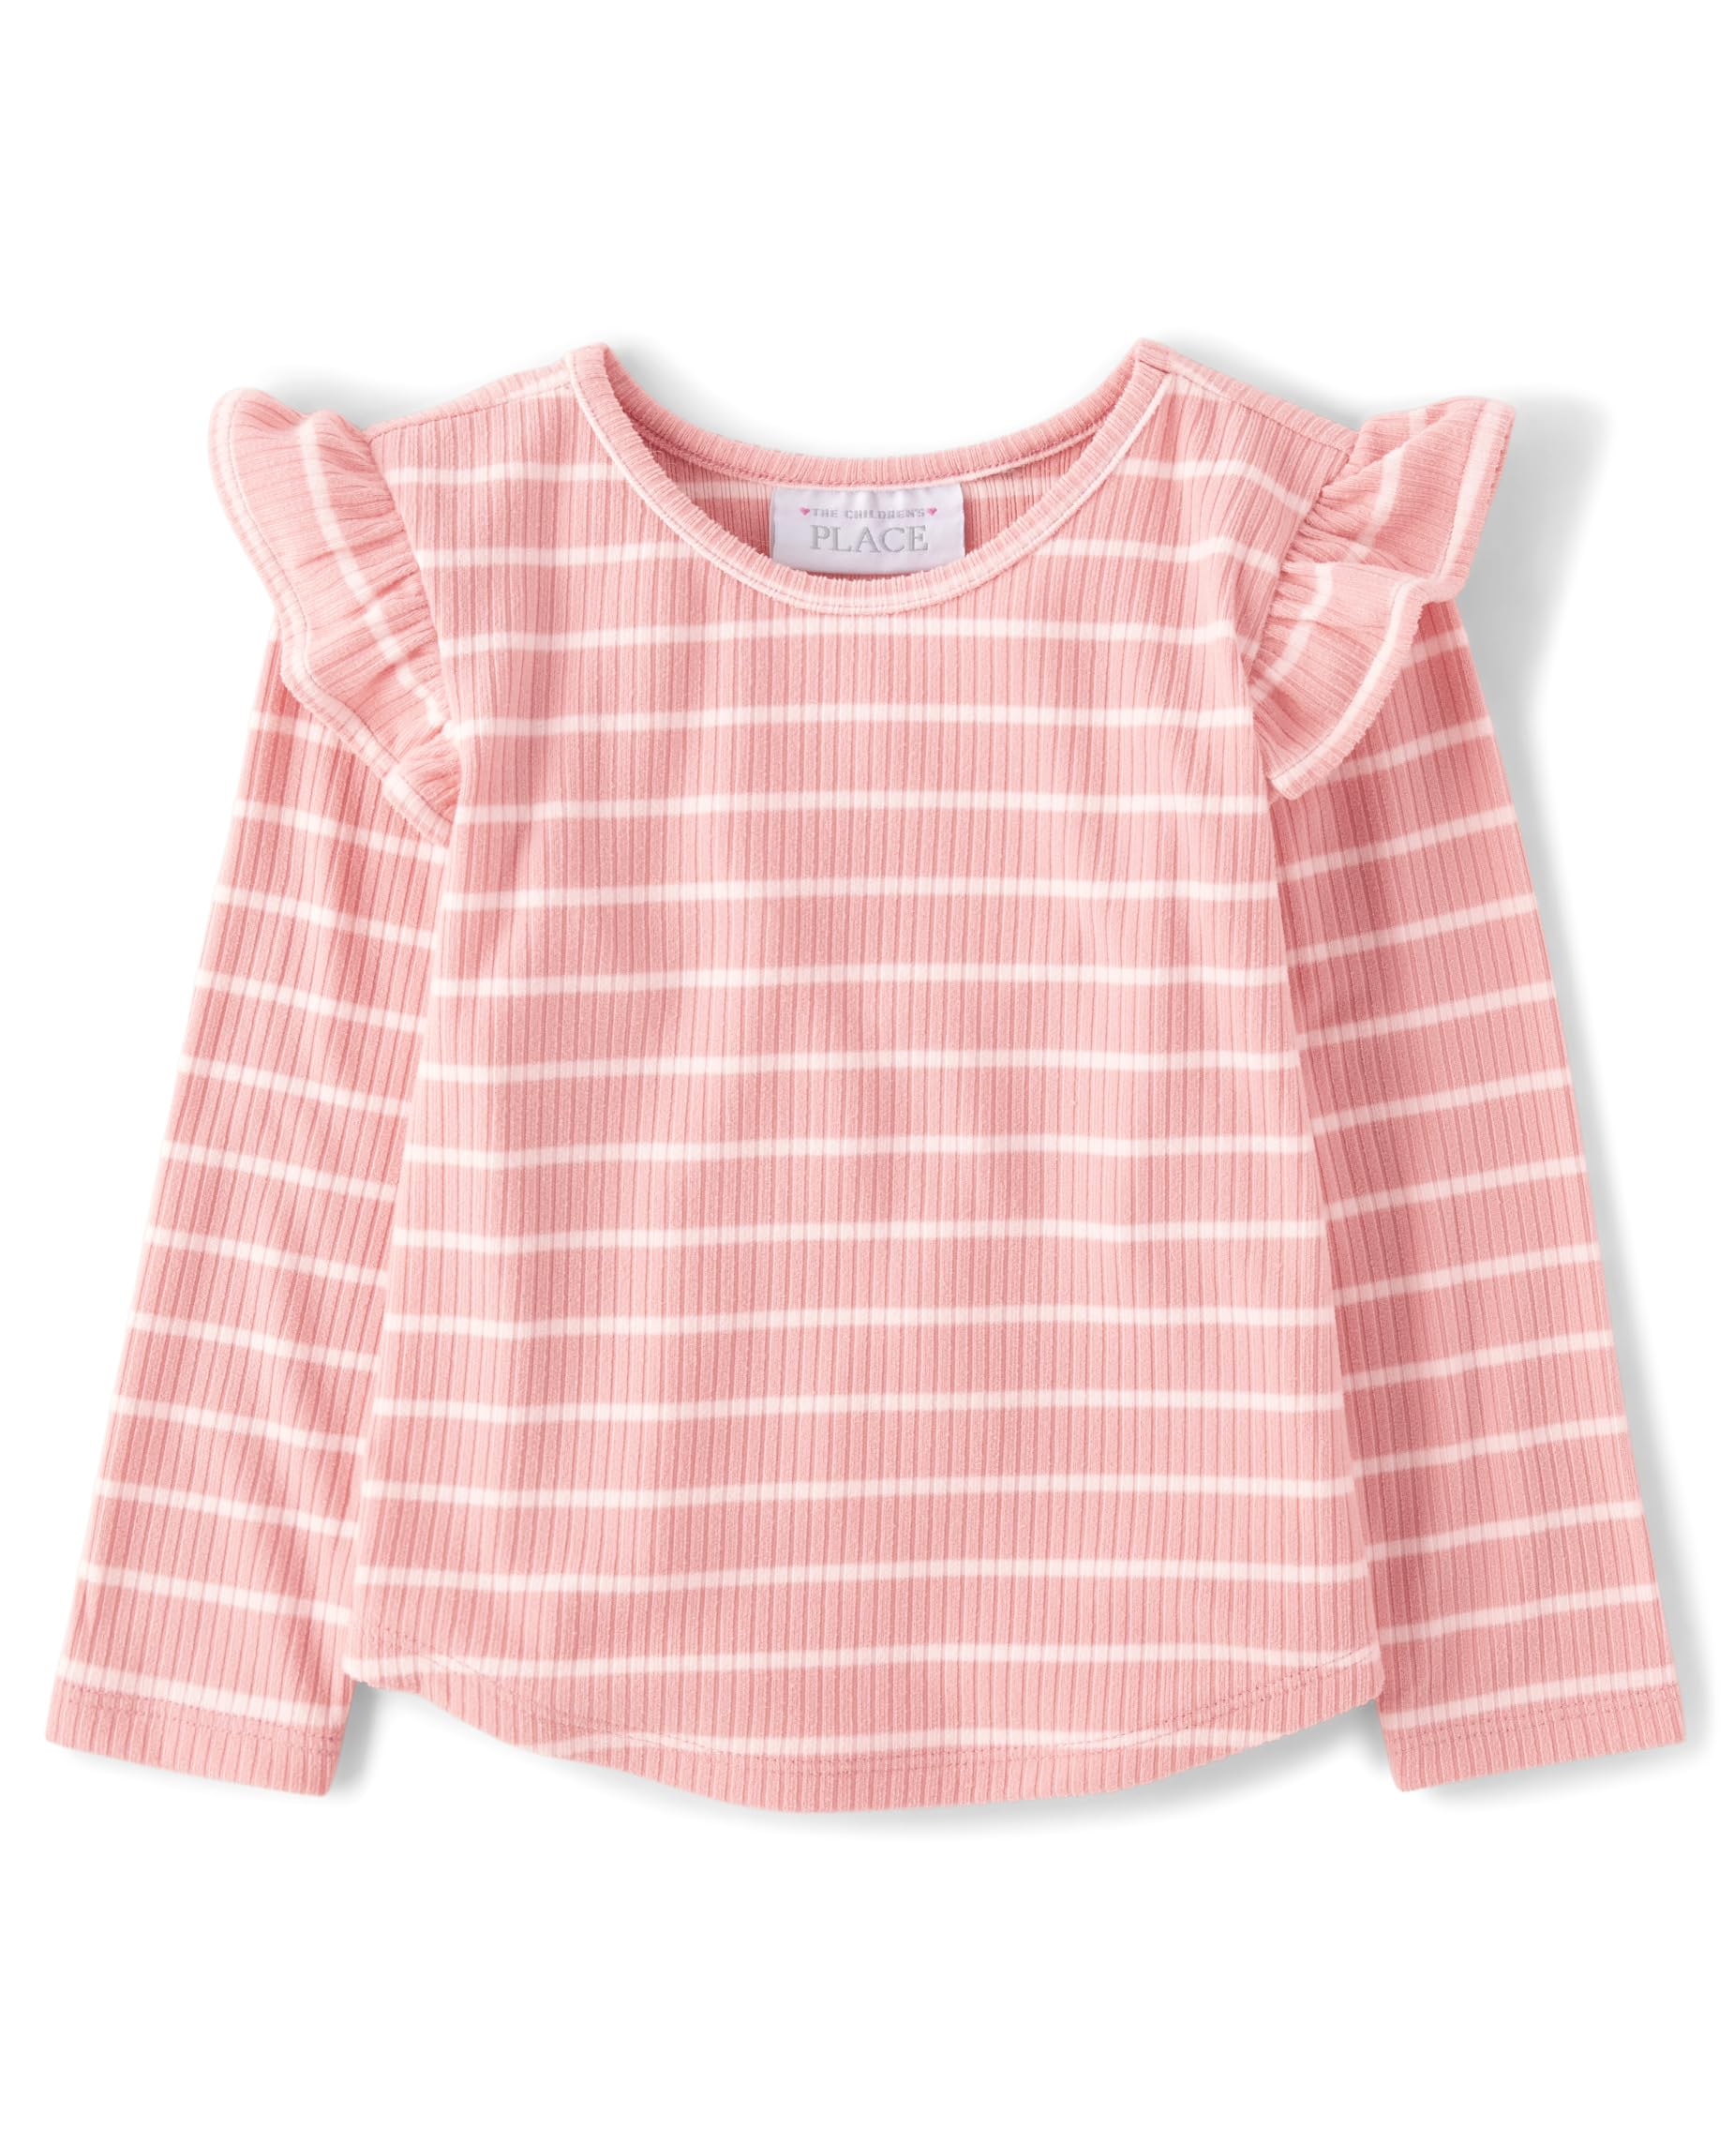 The Children's Place Baby Girls' and Toddler Long Sleeve Ruffle Top